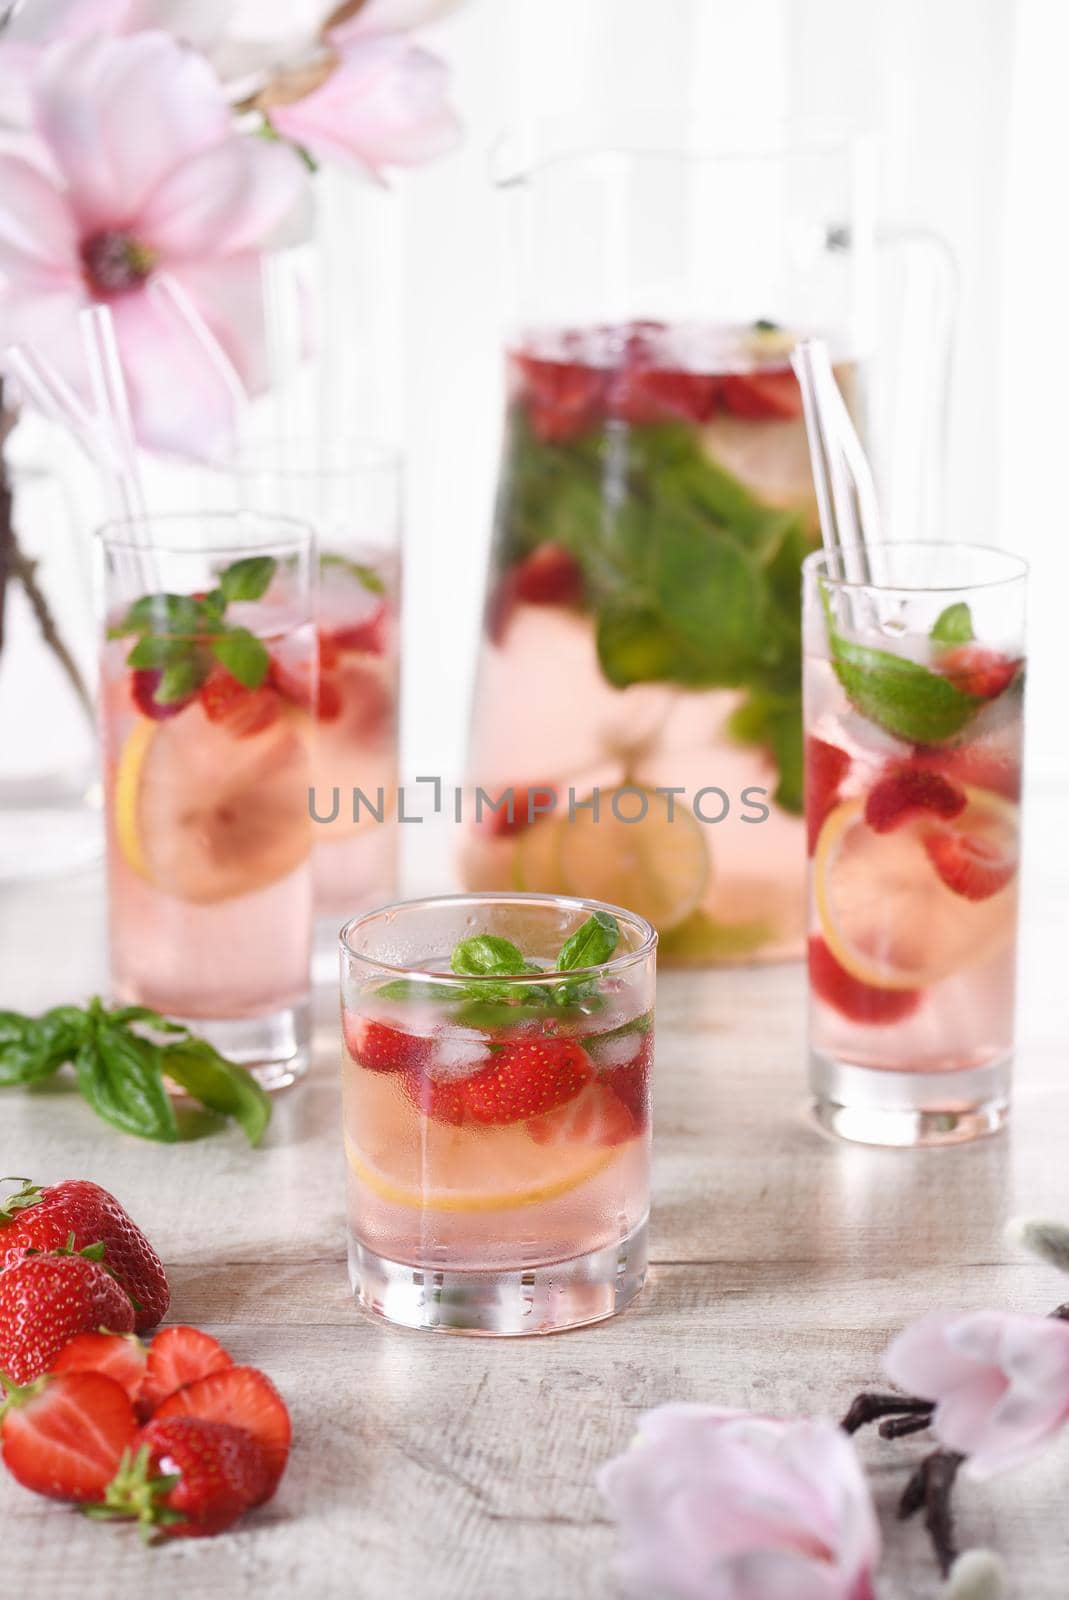 Strawberry summer cocktail with basil by Apolonia